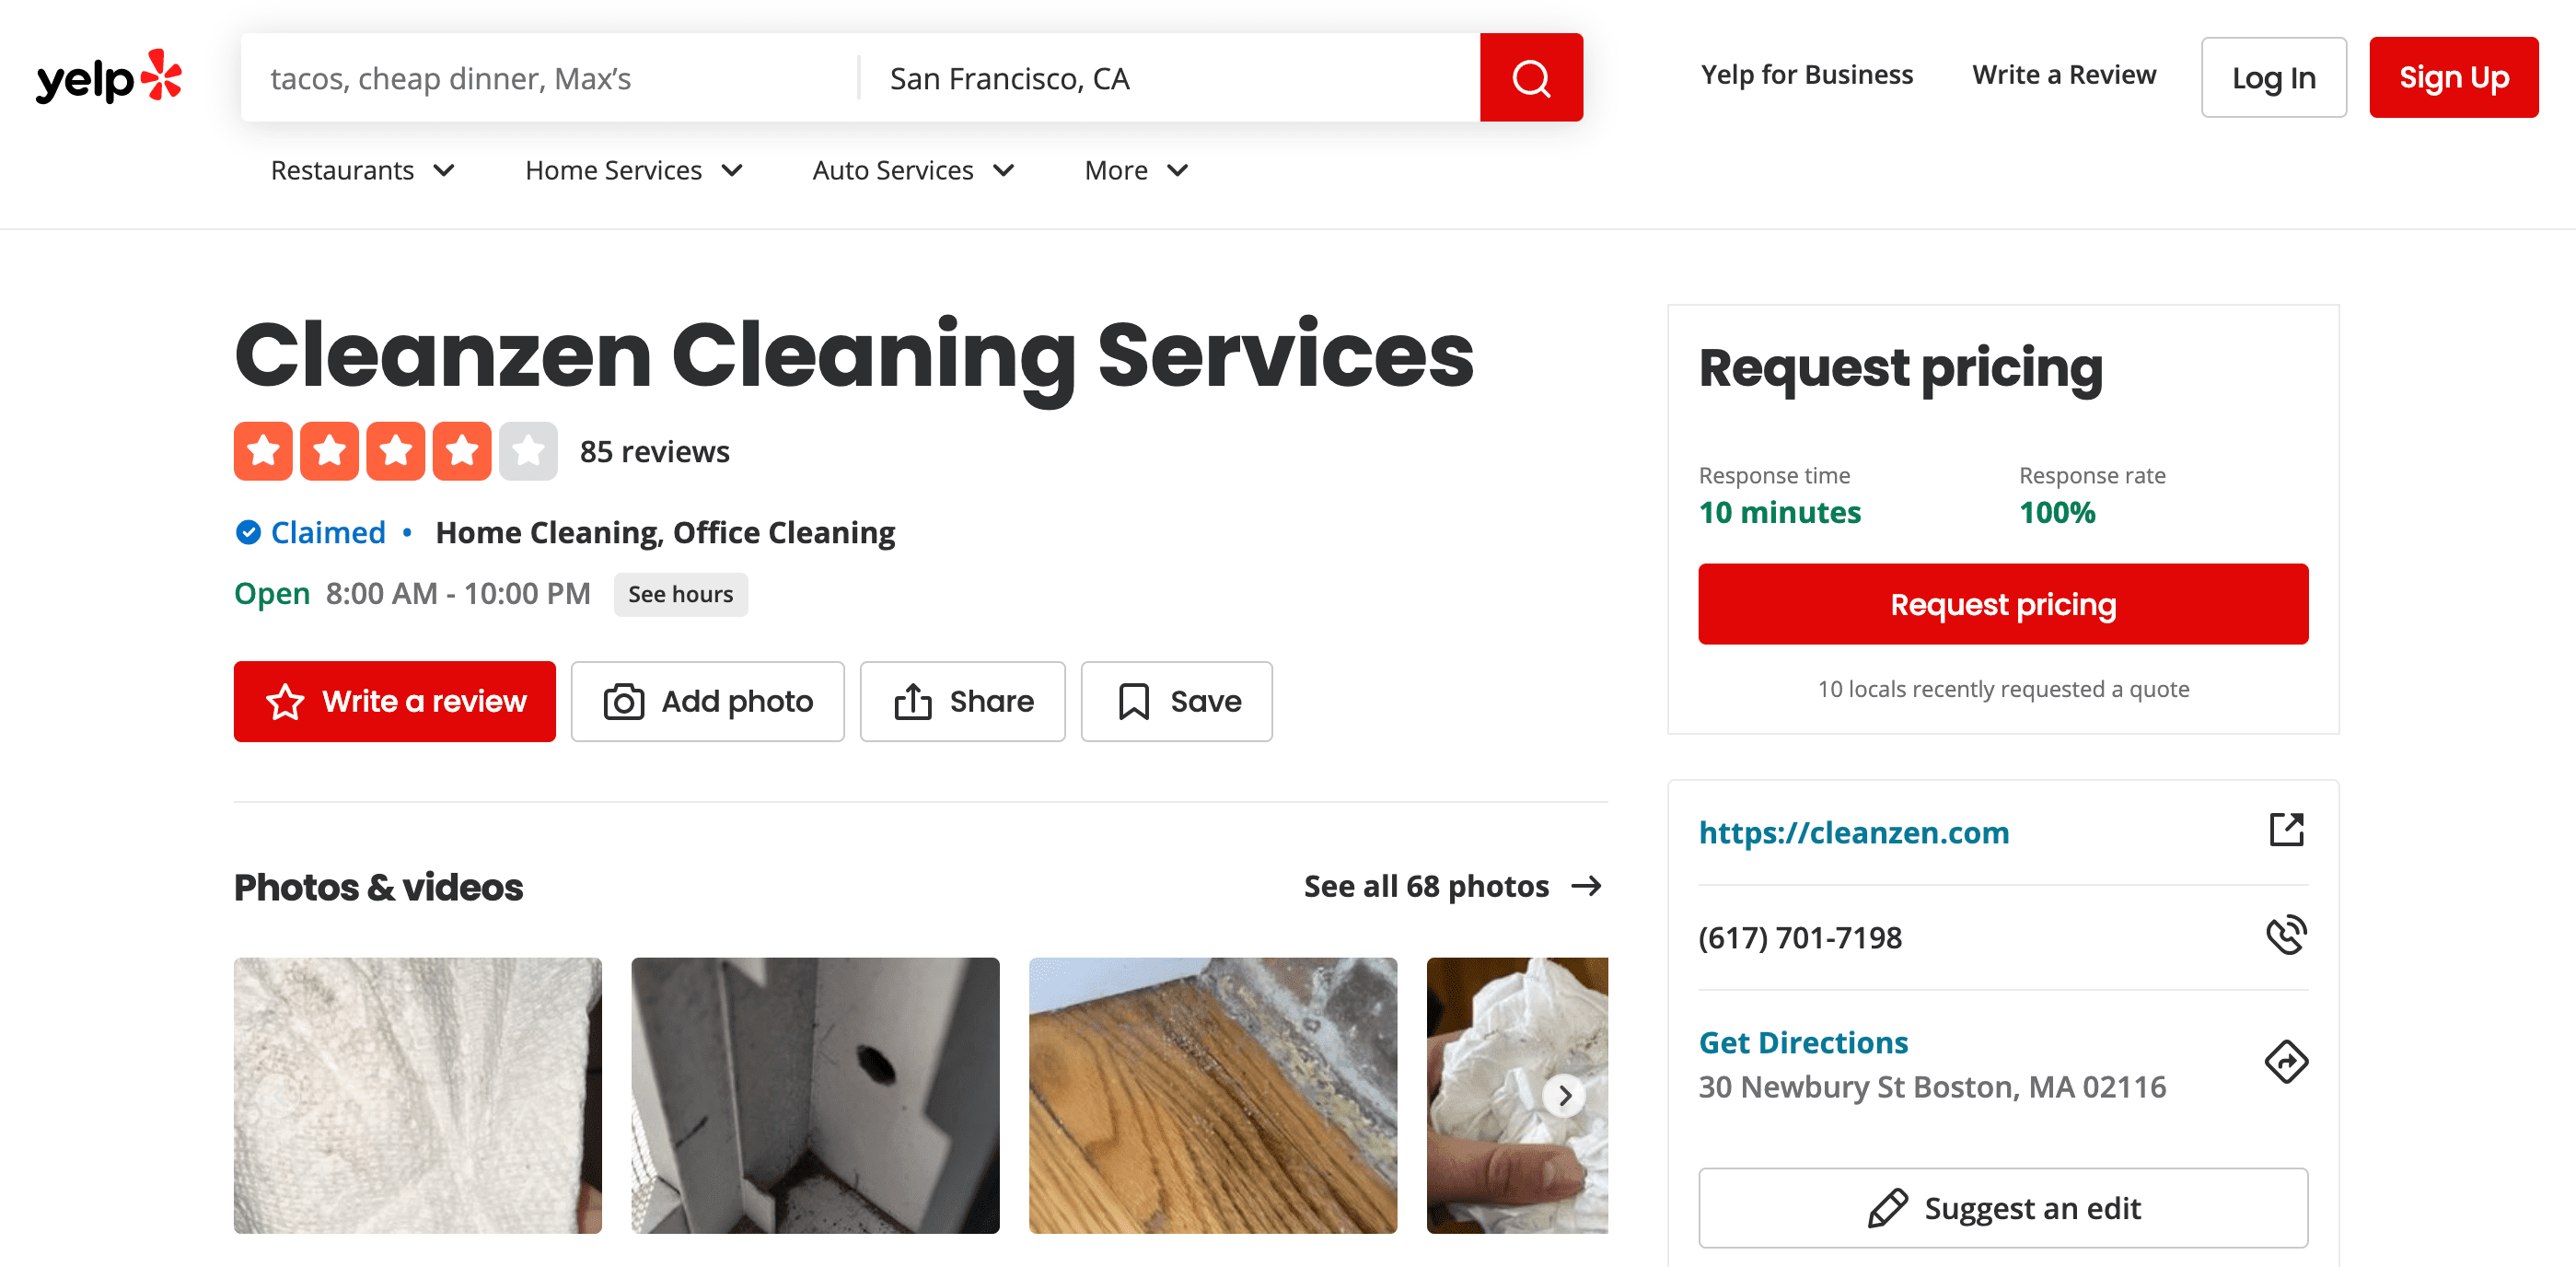 Cleanzen Yelp page